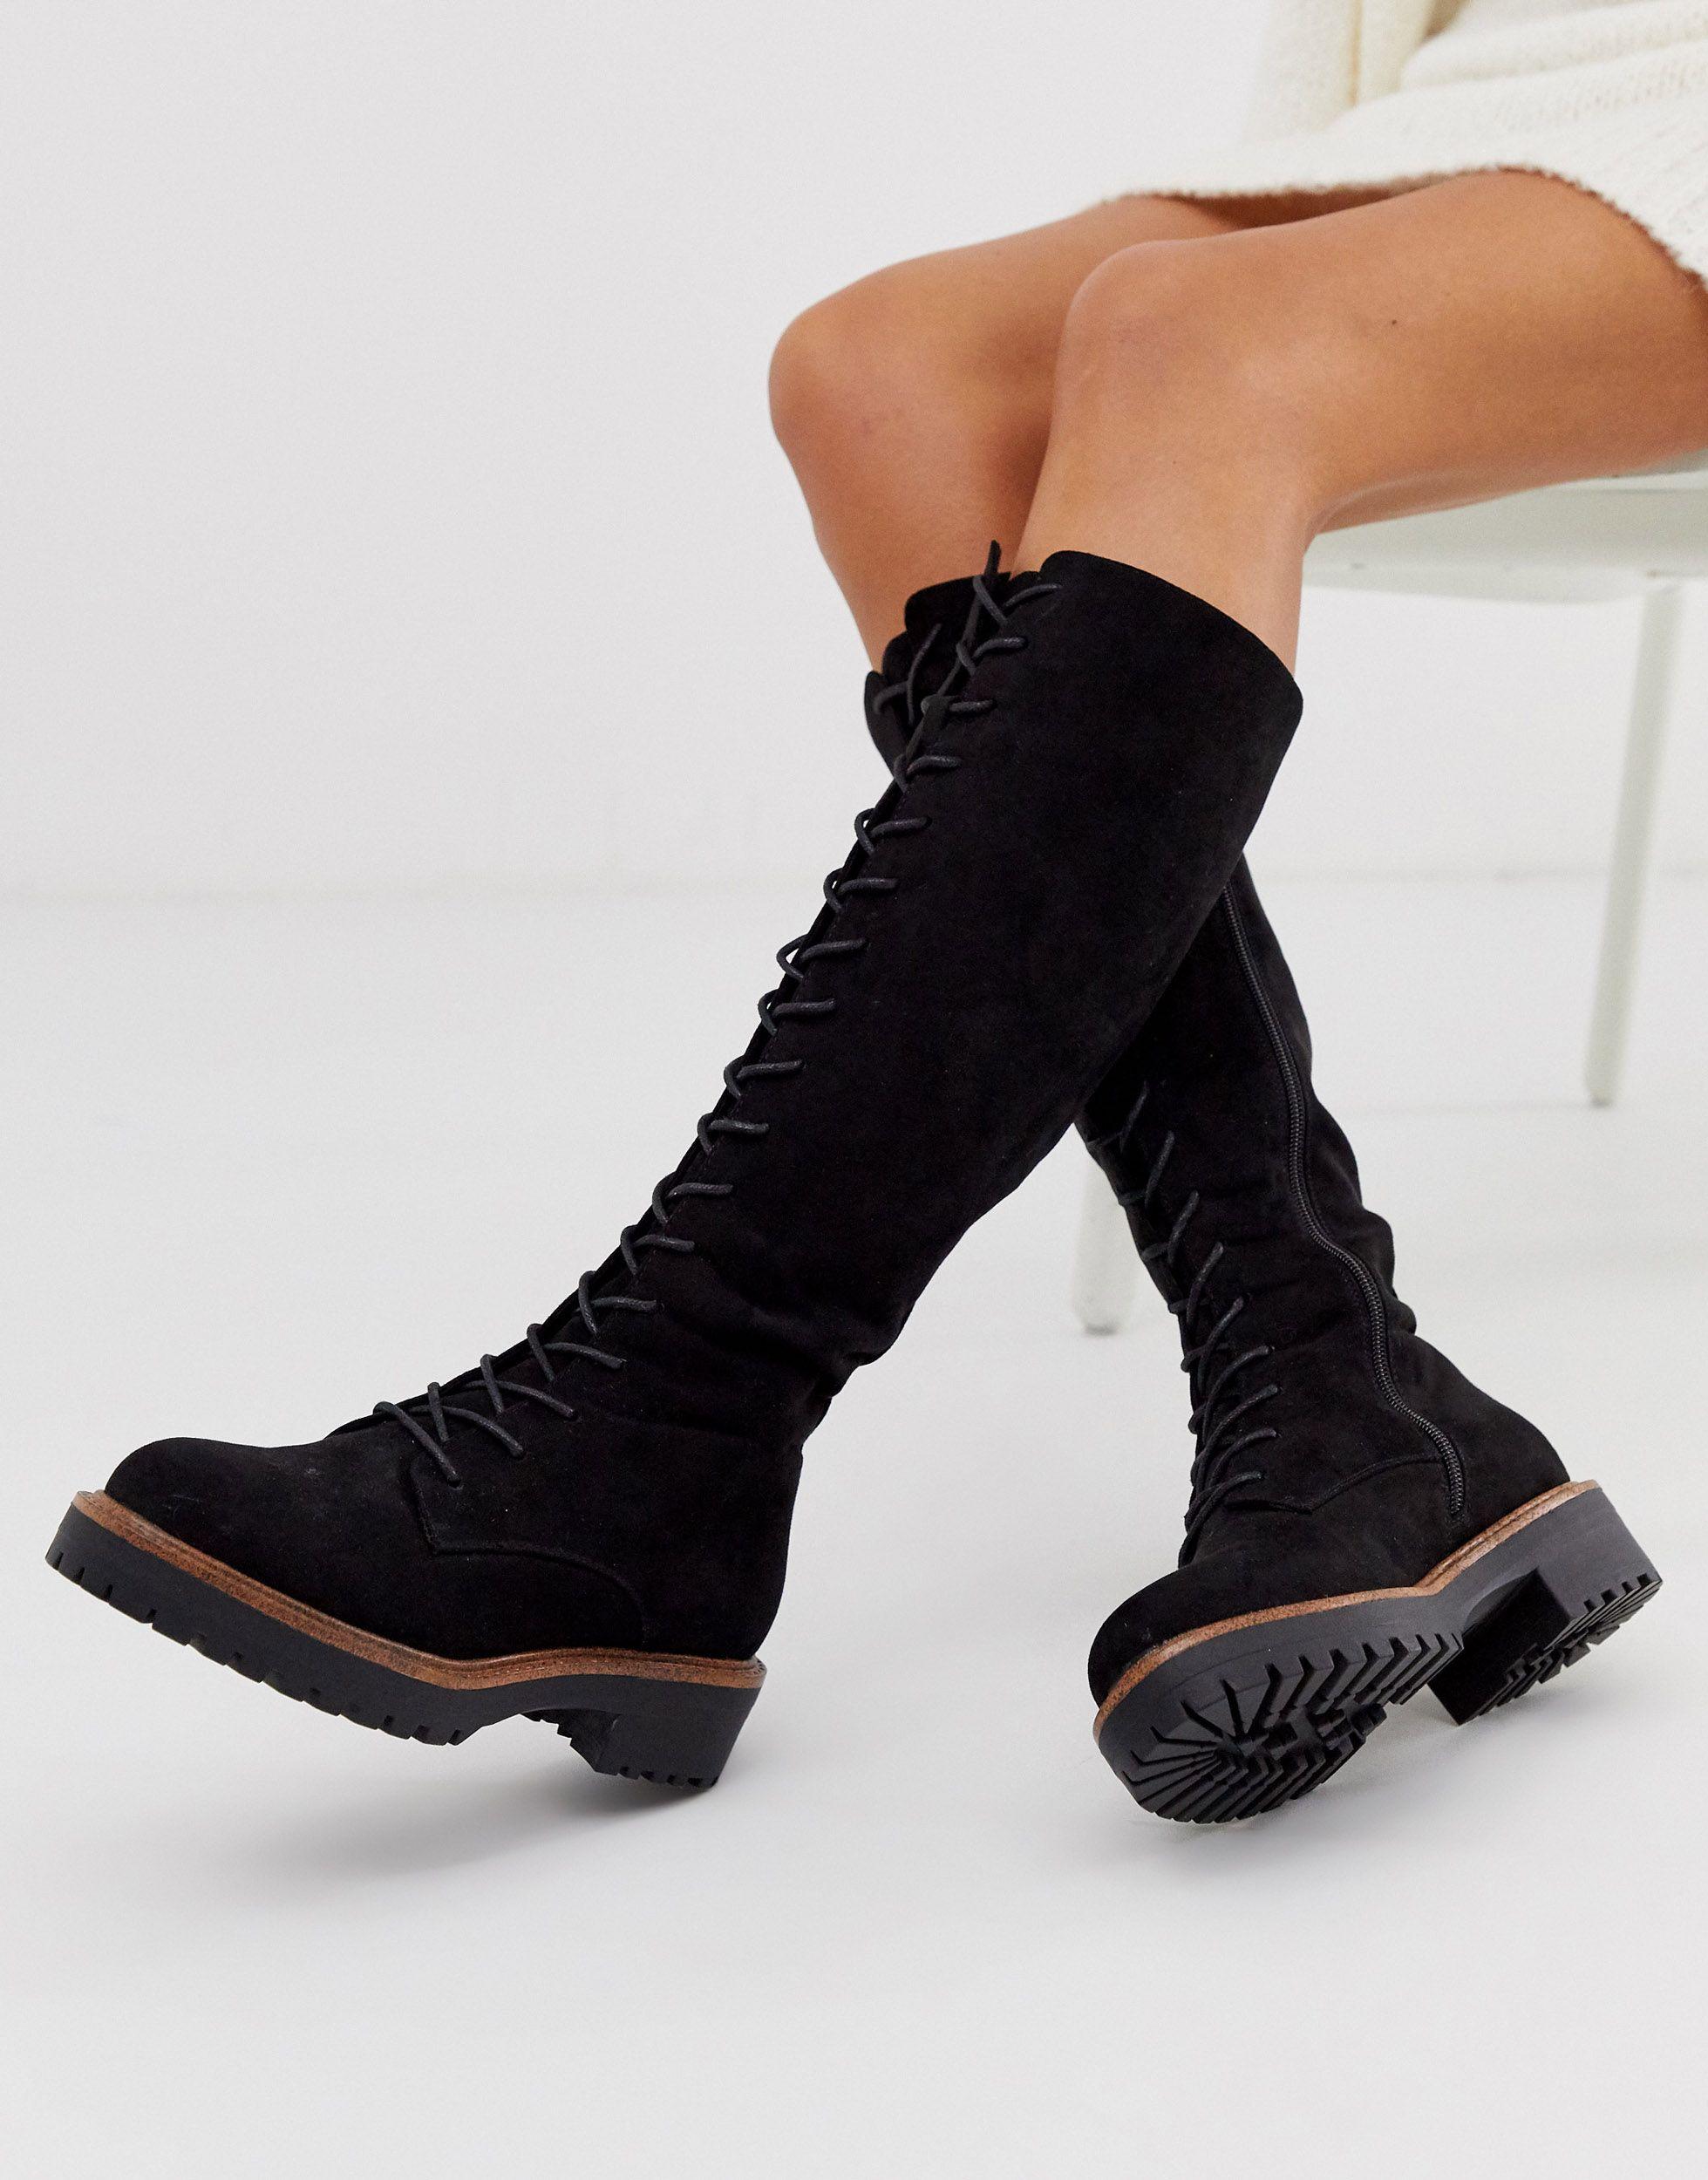 ASOS Courtney Chunky Lace Up Knee High Boots in Black | Lyst